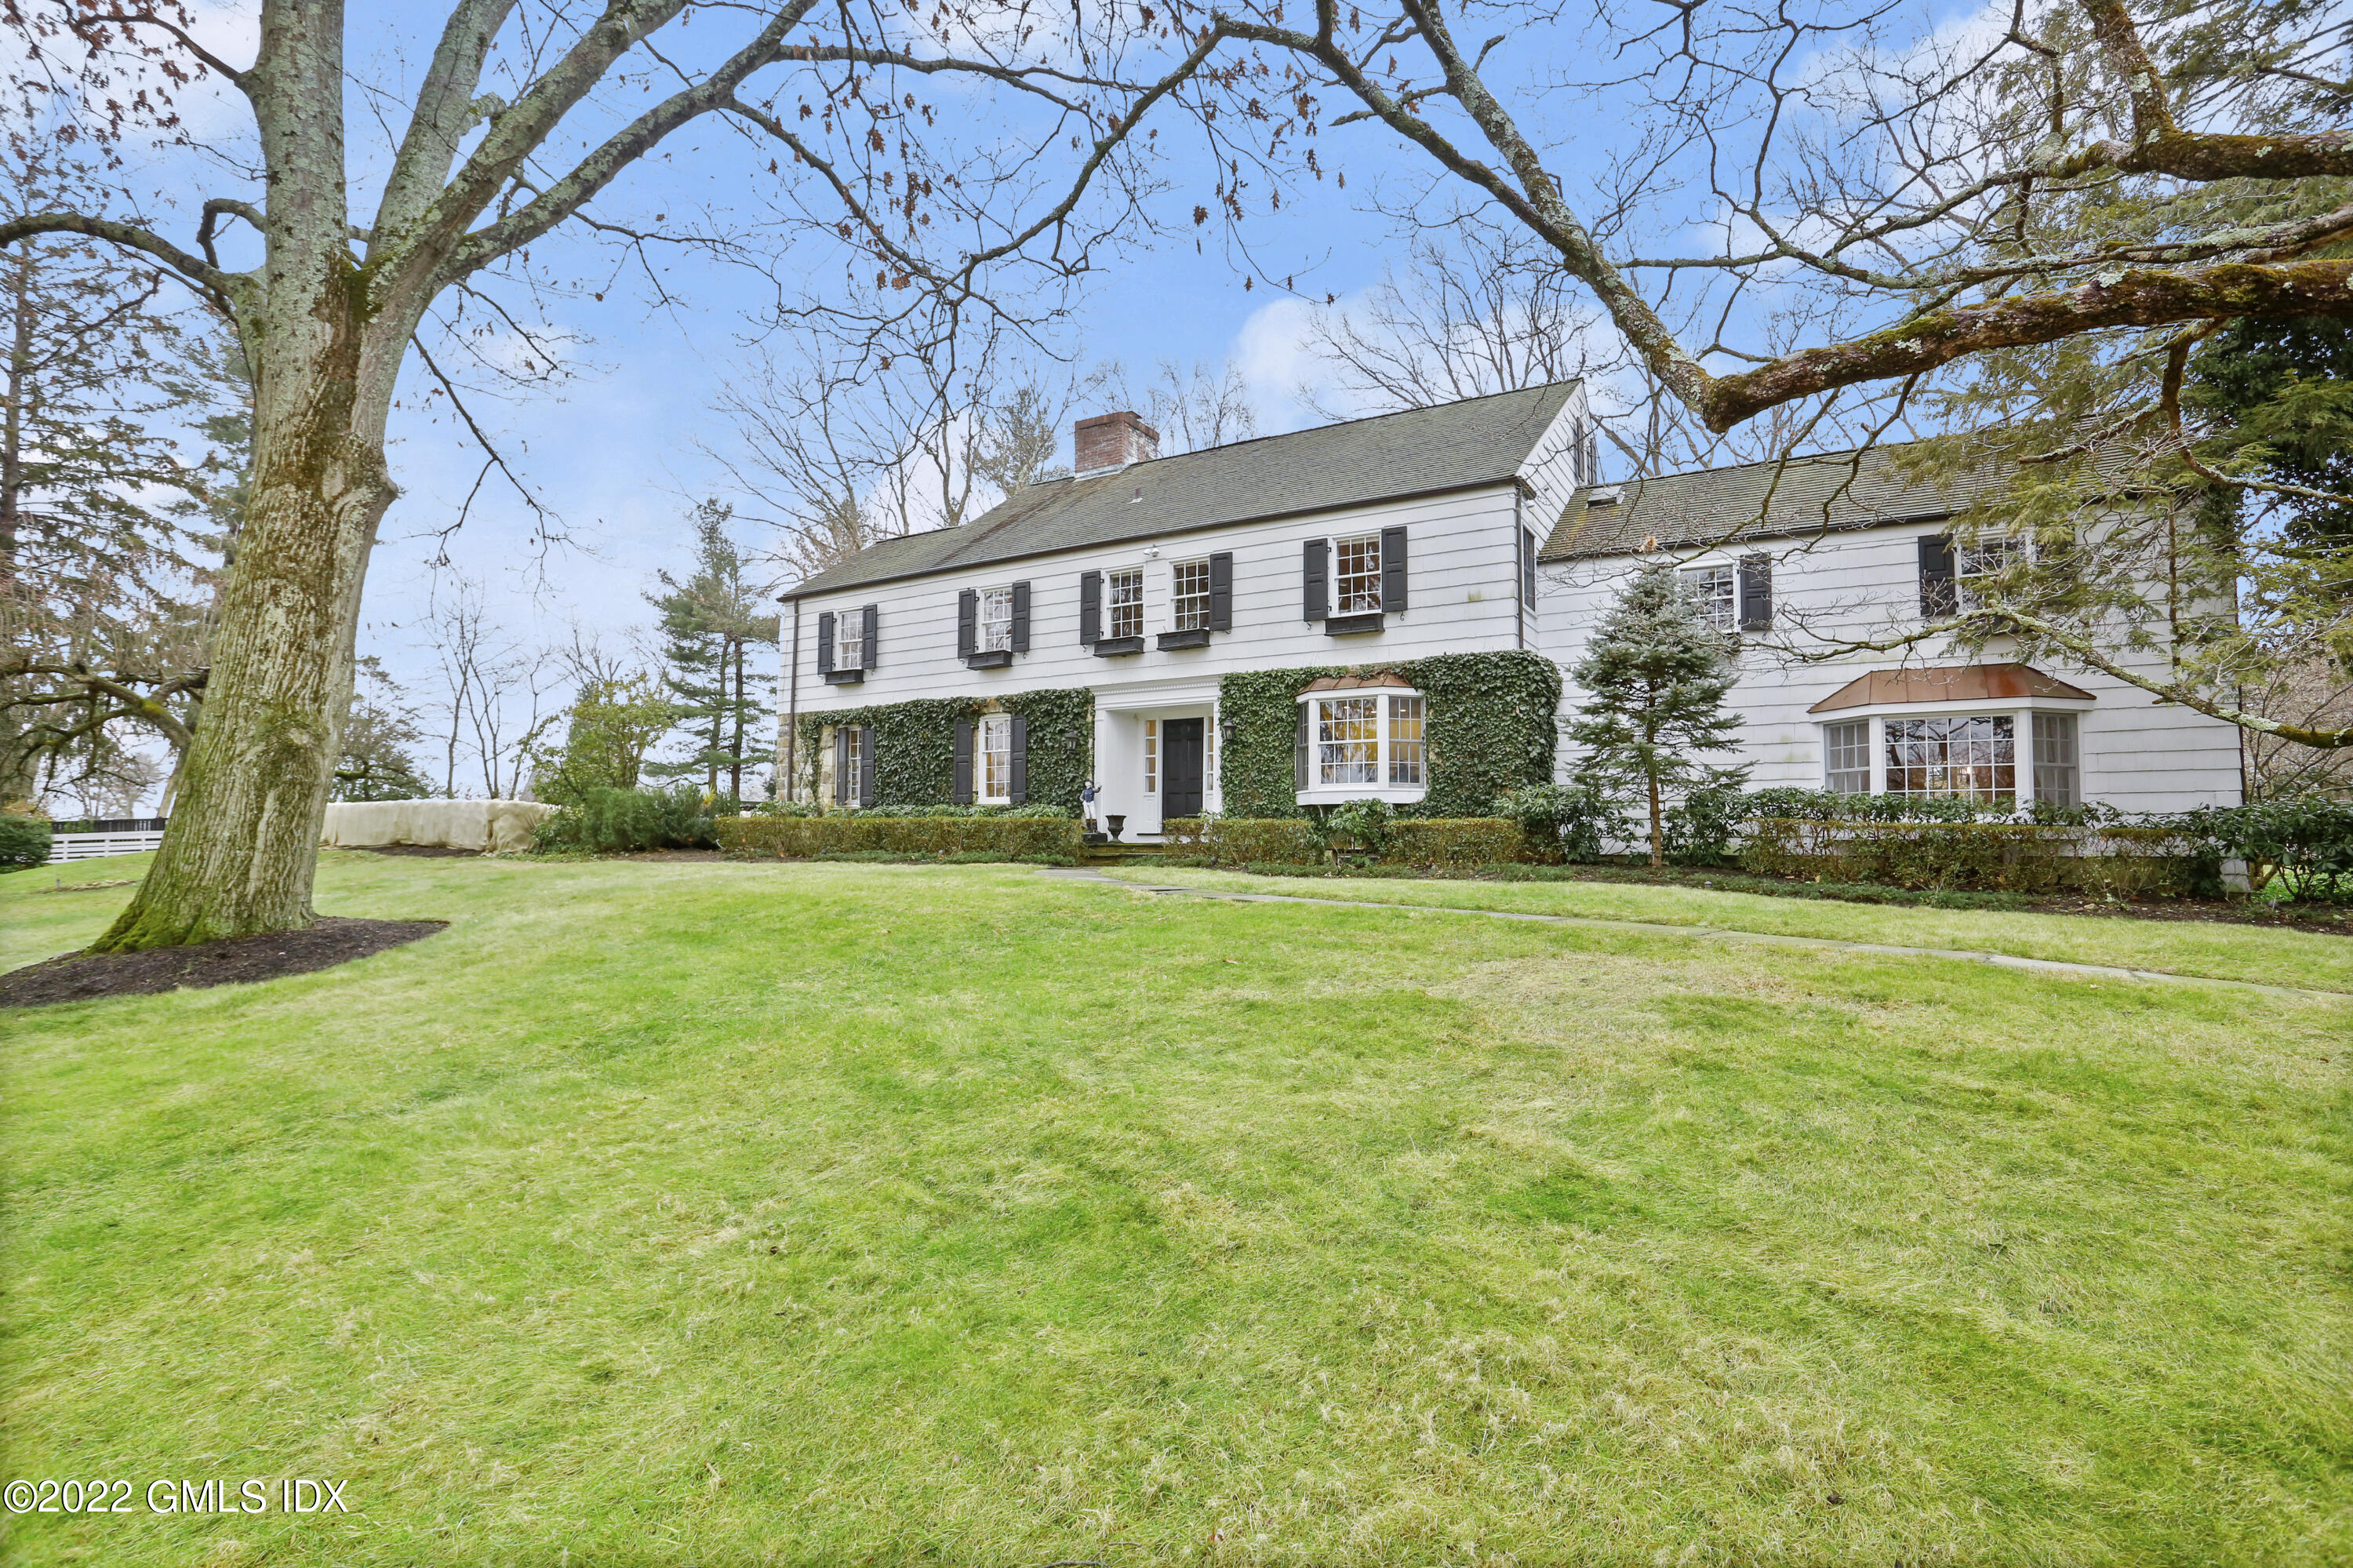 508 Round Hill Road, Greenwich, Connecticut - 6 Bedrooms  
5 Bathrooms - 